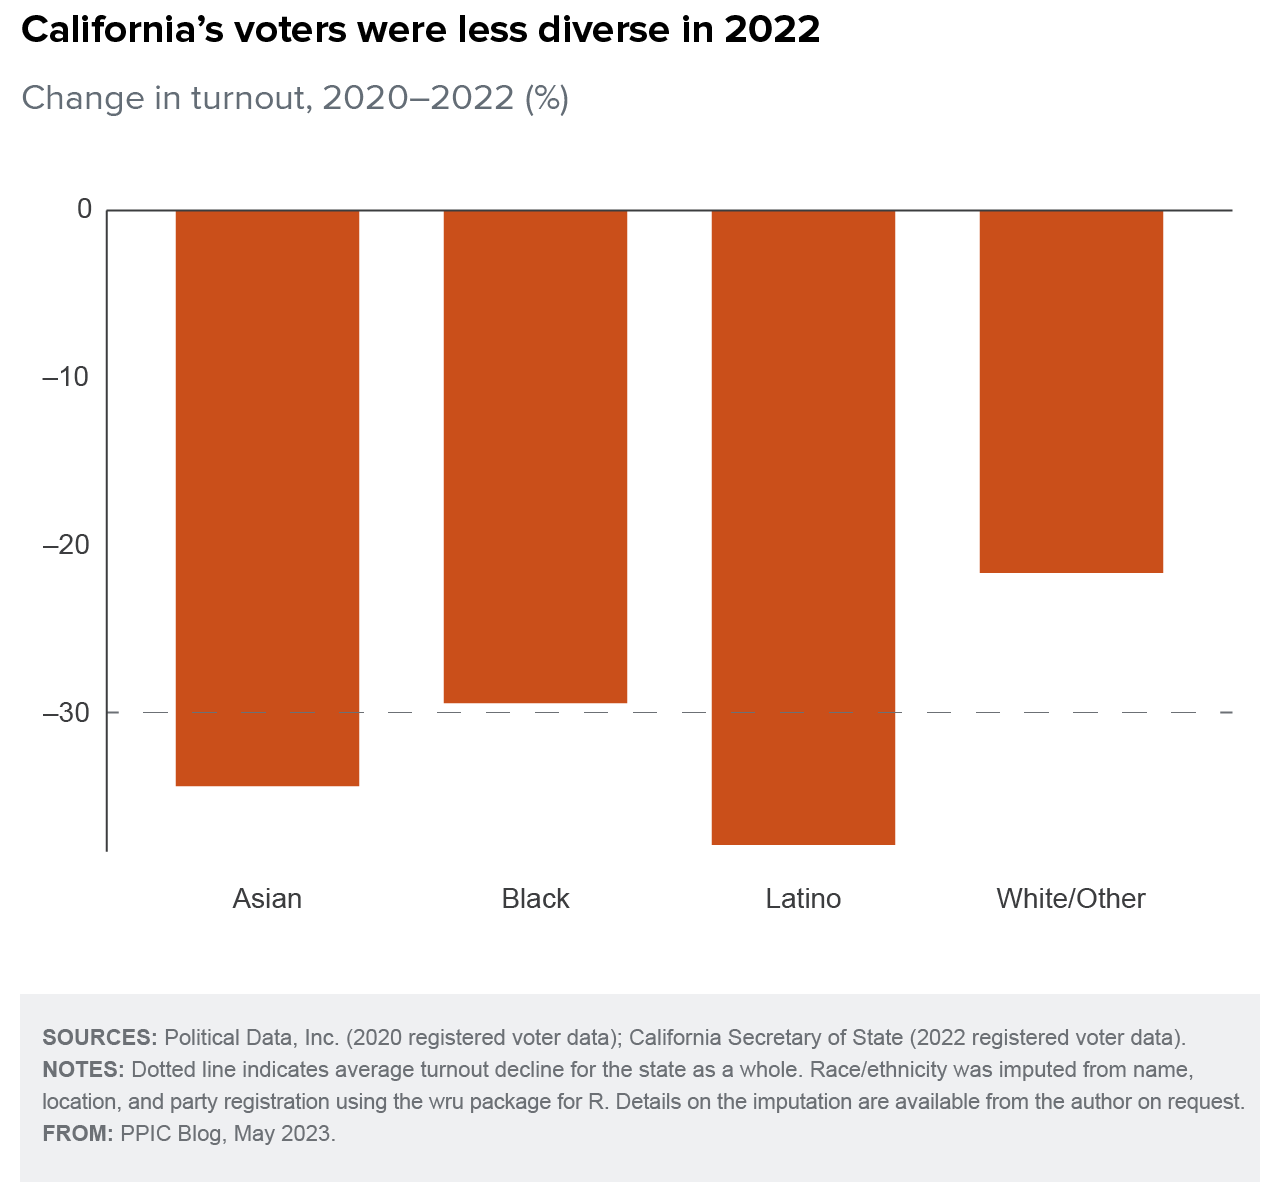 figure - California’s voters were less diverse in 2022